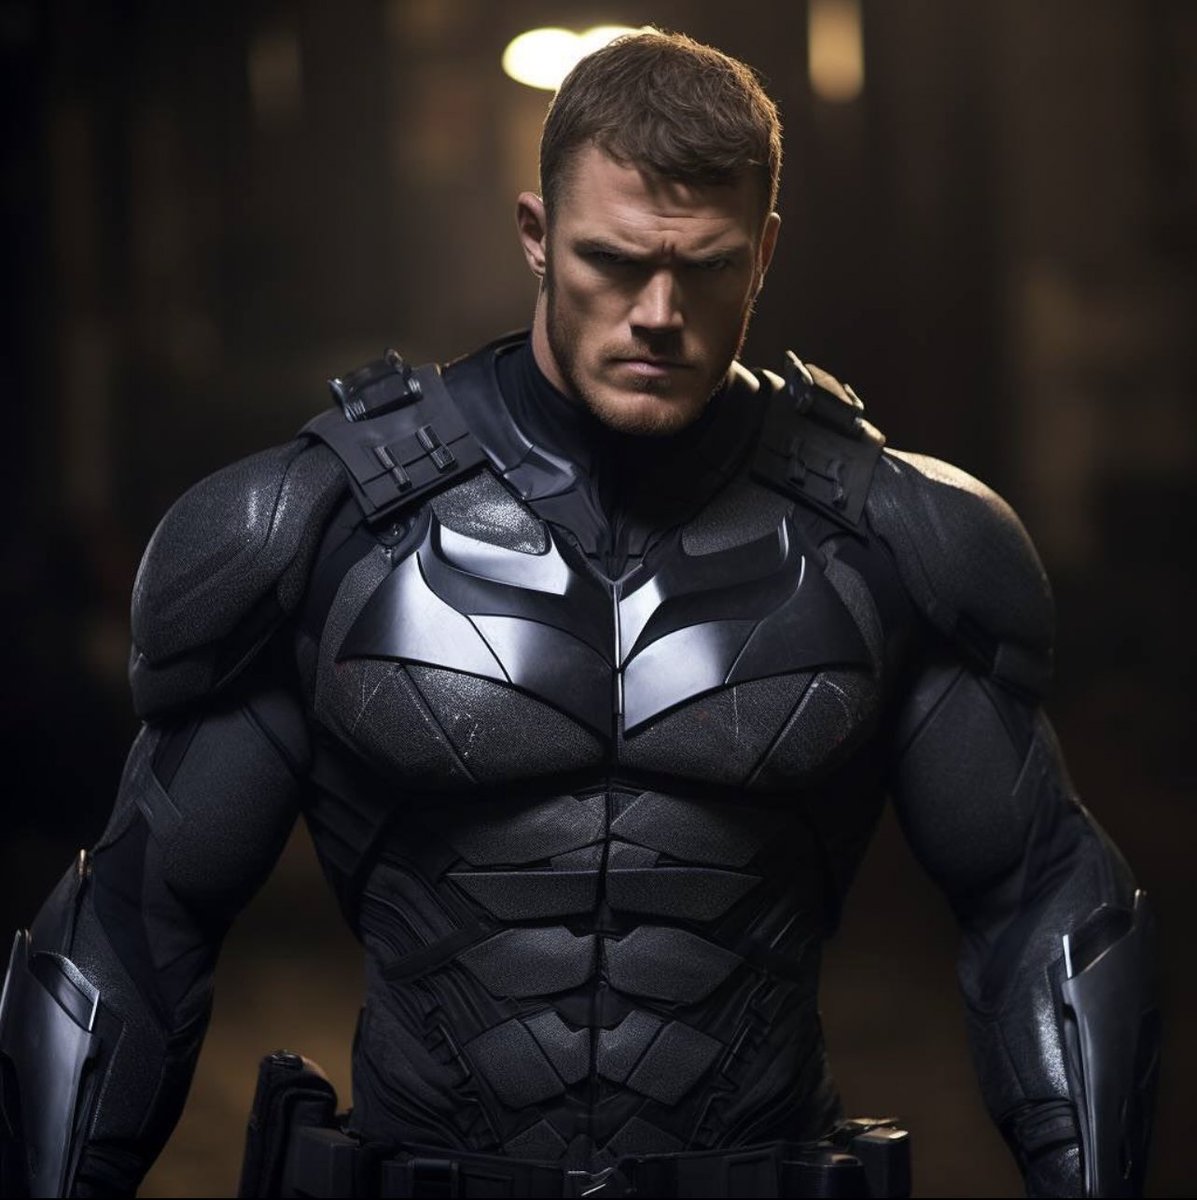 Yeah … Alan Ritchson would look good as Batman. I’m 100% convinced now. 
Give him the role. #TheBraveAndTheBold